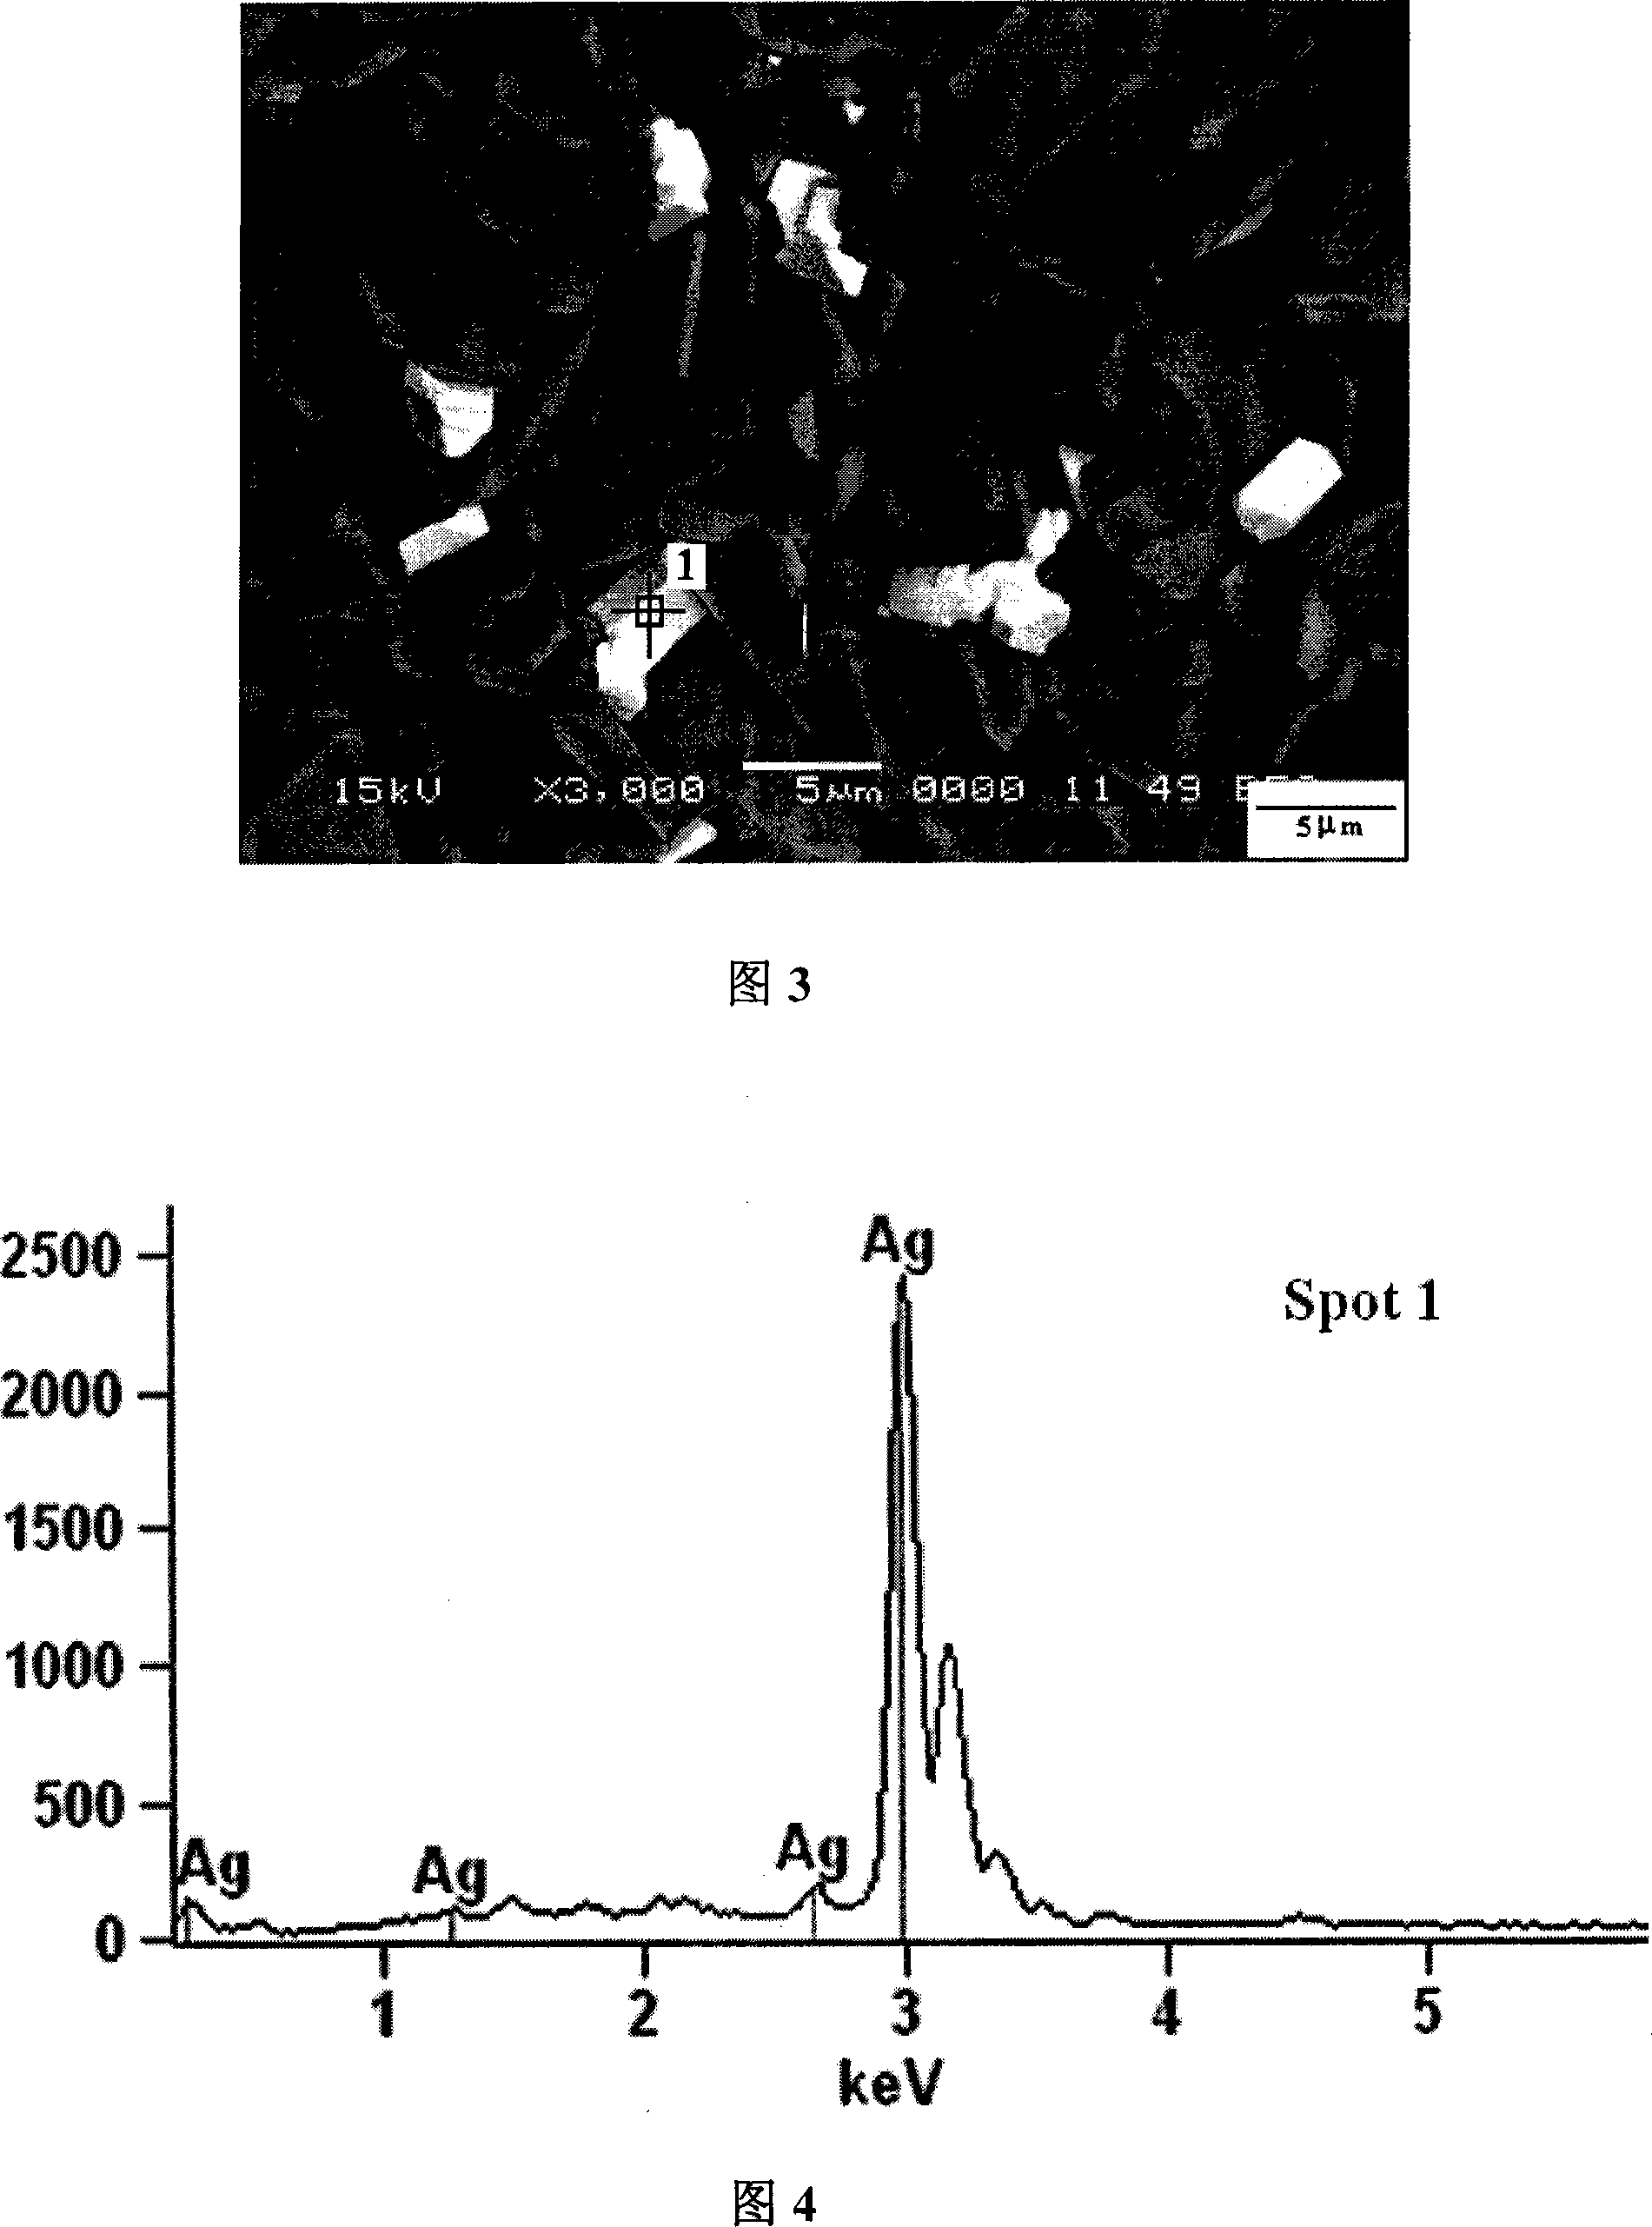 Low-temperature sintered LTCC microwave dielectric ceramics material and preparation method thereof